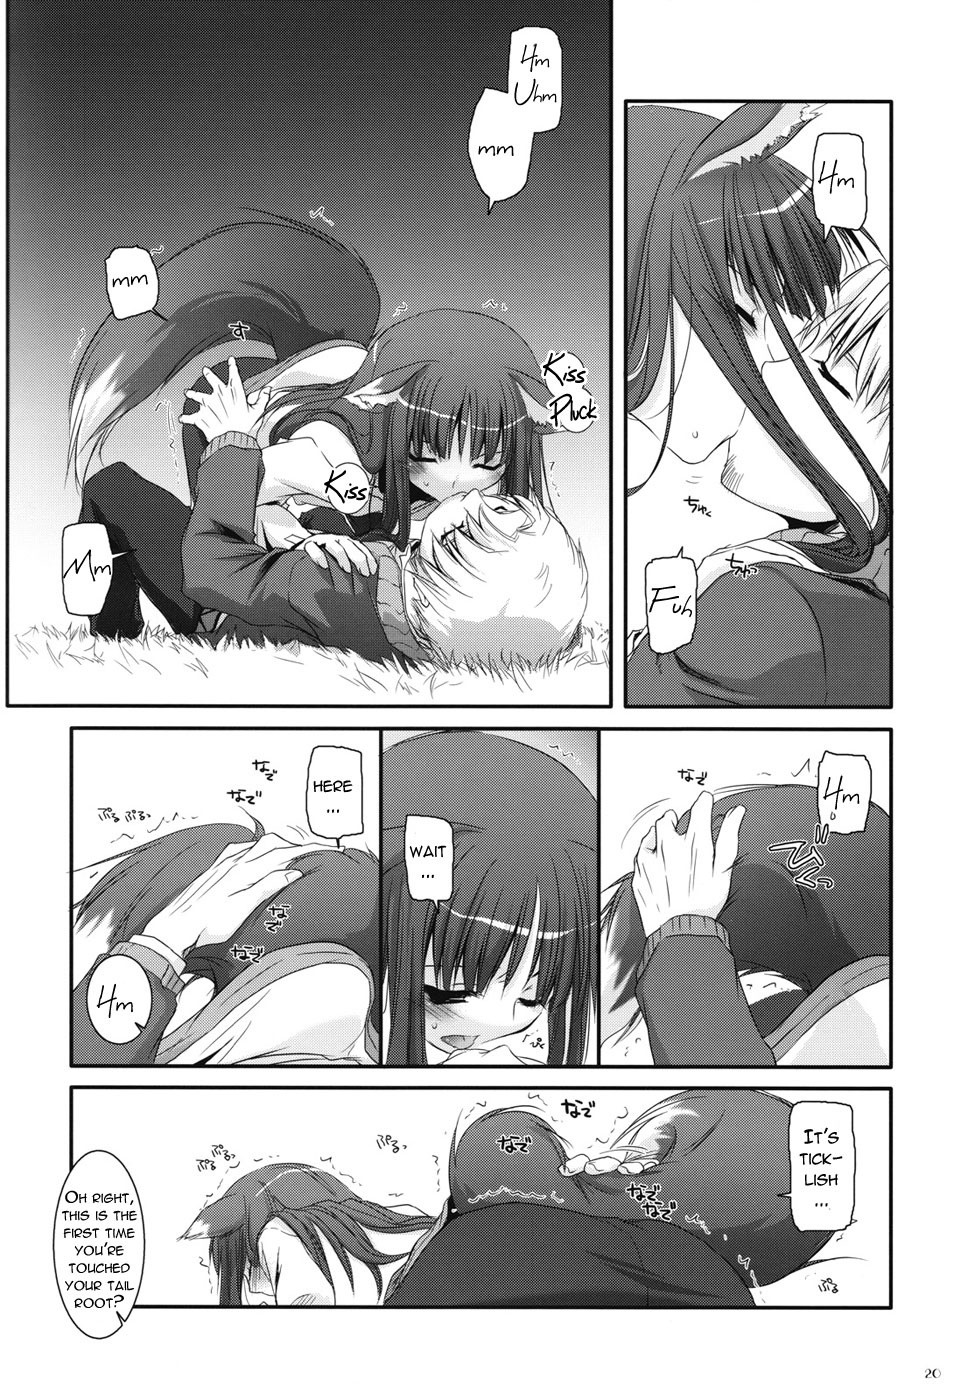 D.L. action 43 hentai manga picture 17